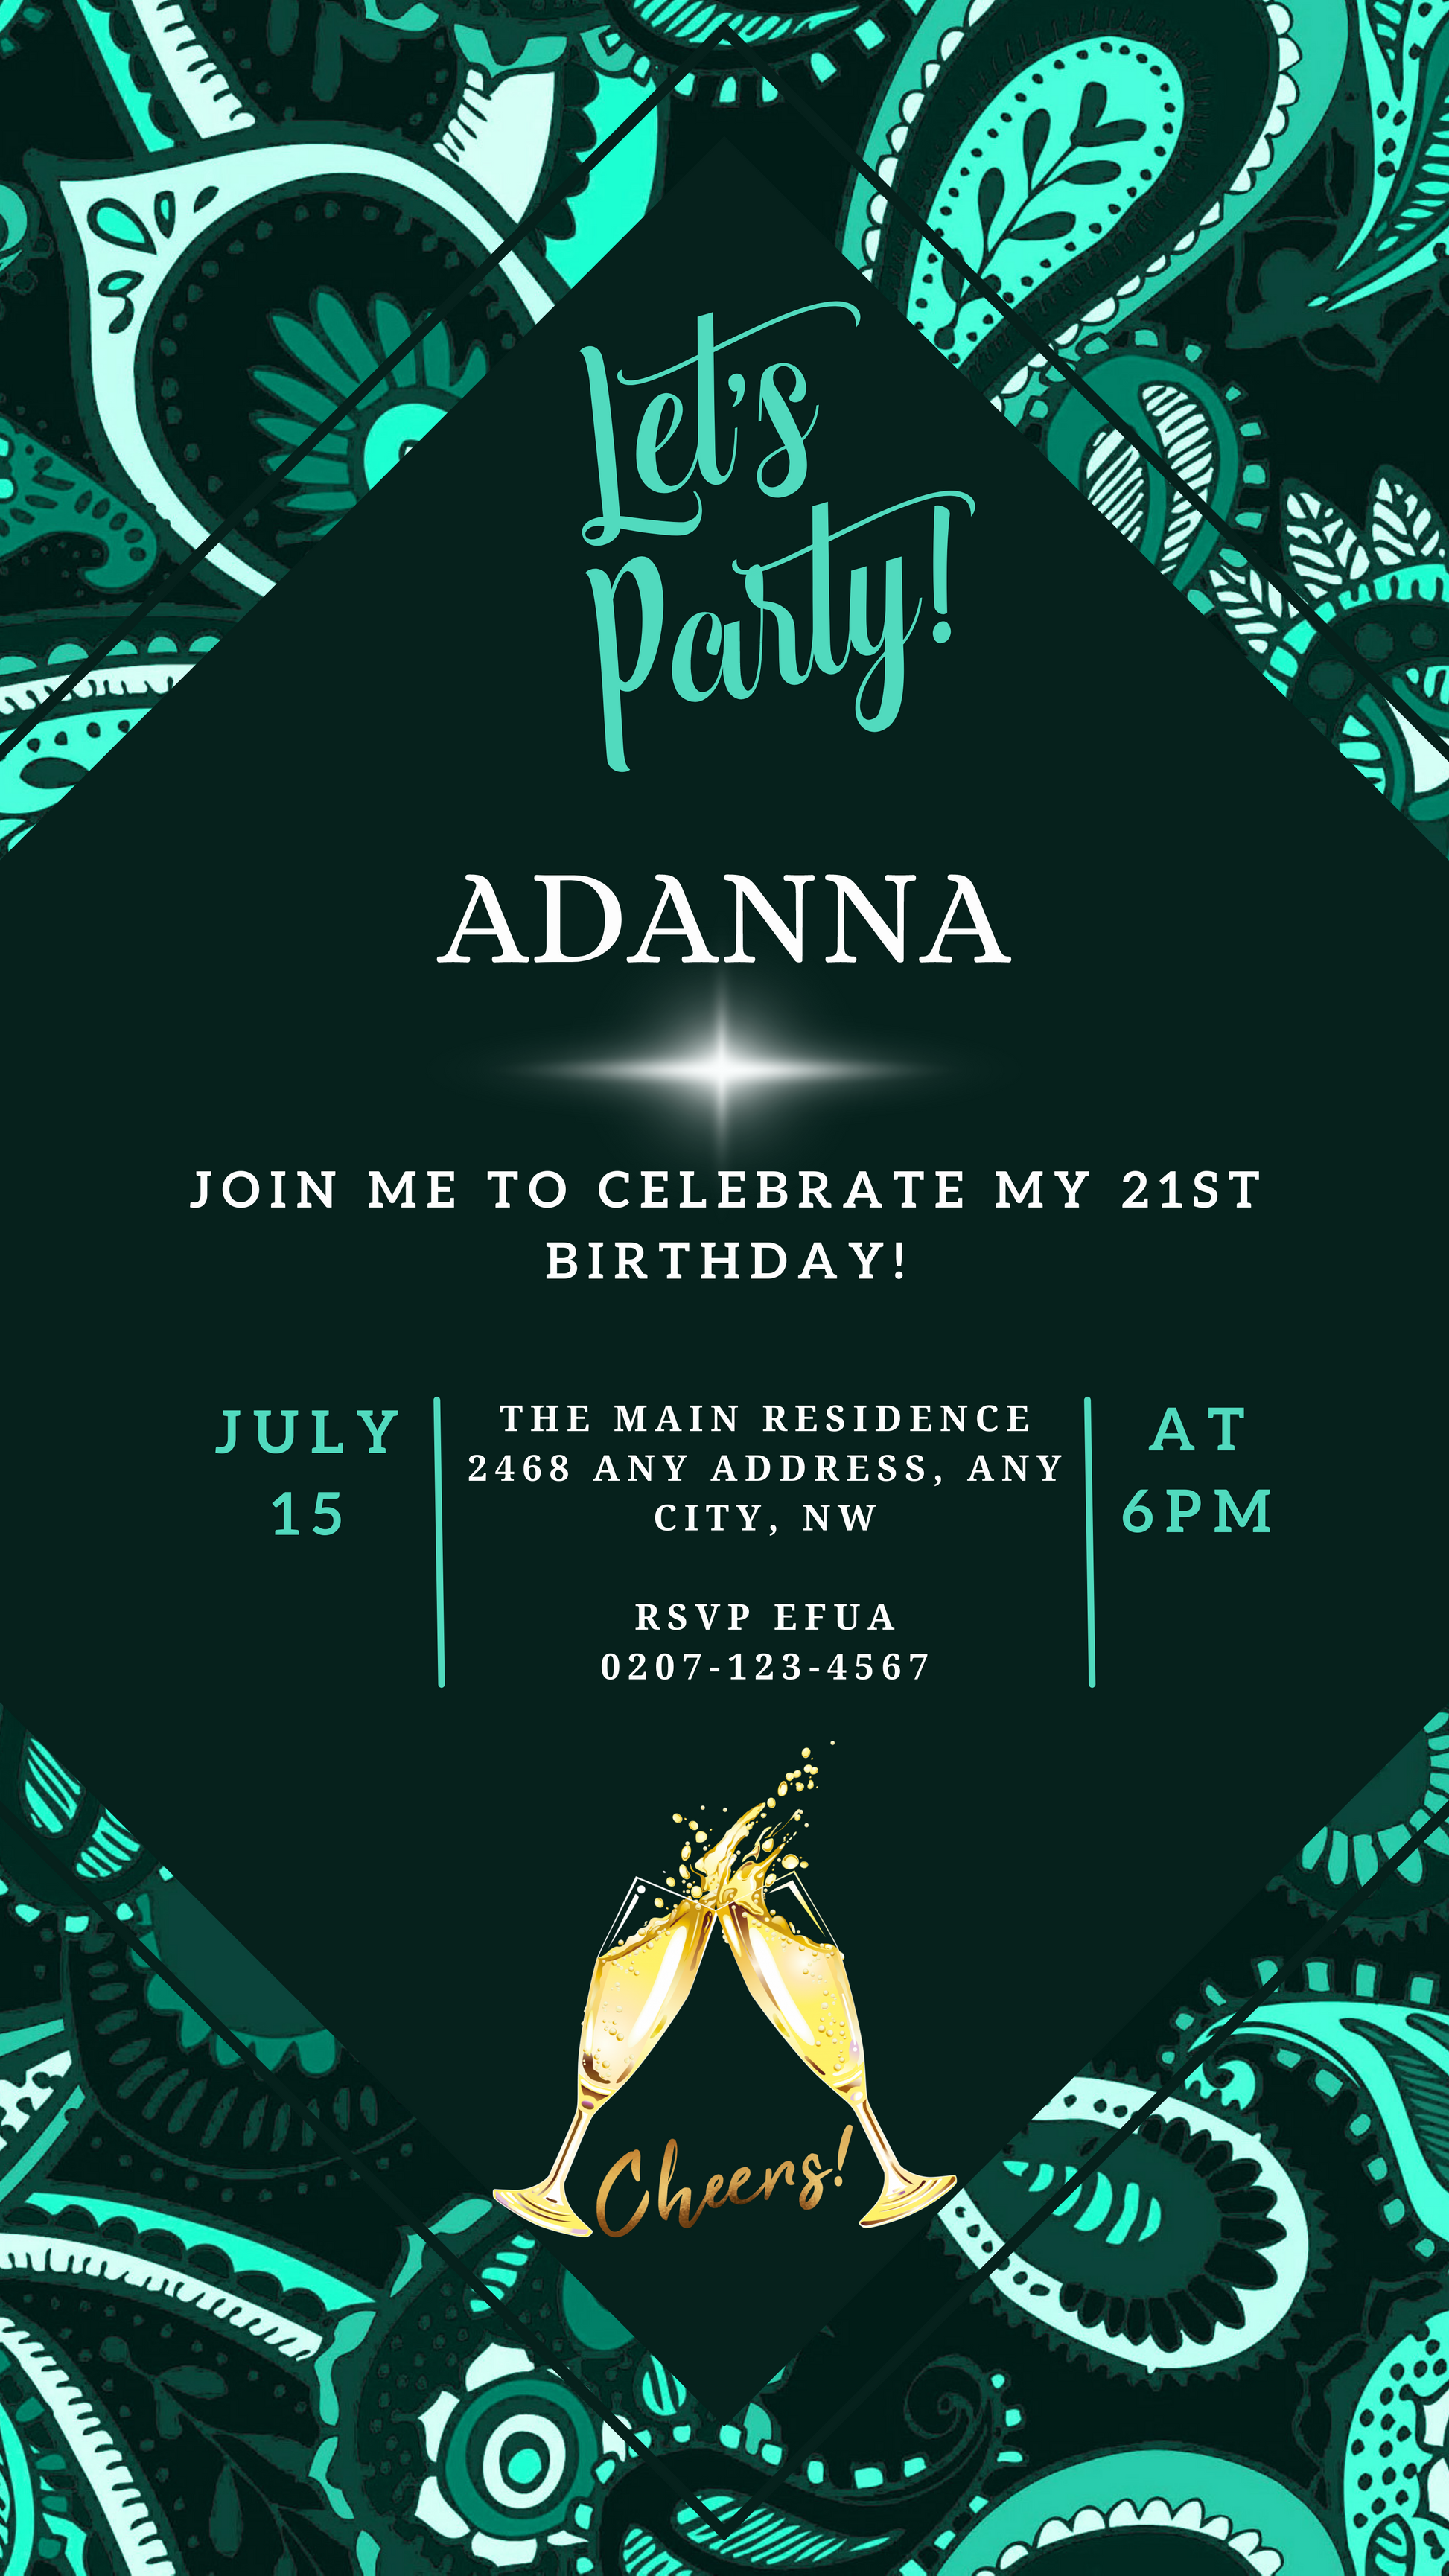 Green White African Ankara Editable Party Evite featuring gold champagne glasses and customizable text for digital invitations via Canva. Perfect for various celebrations.